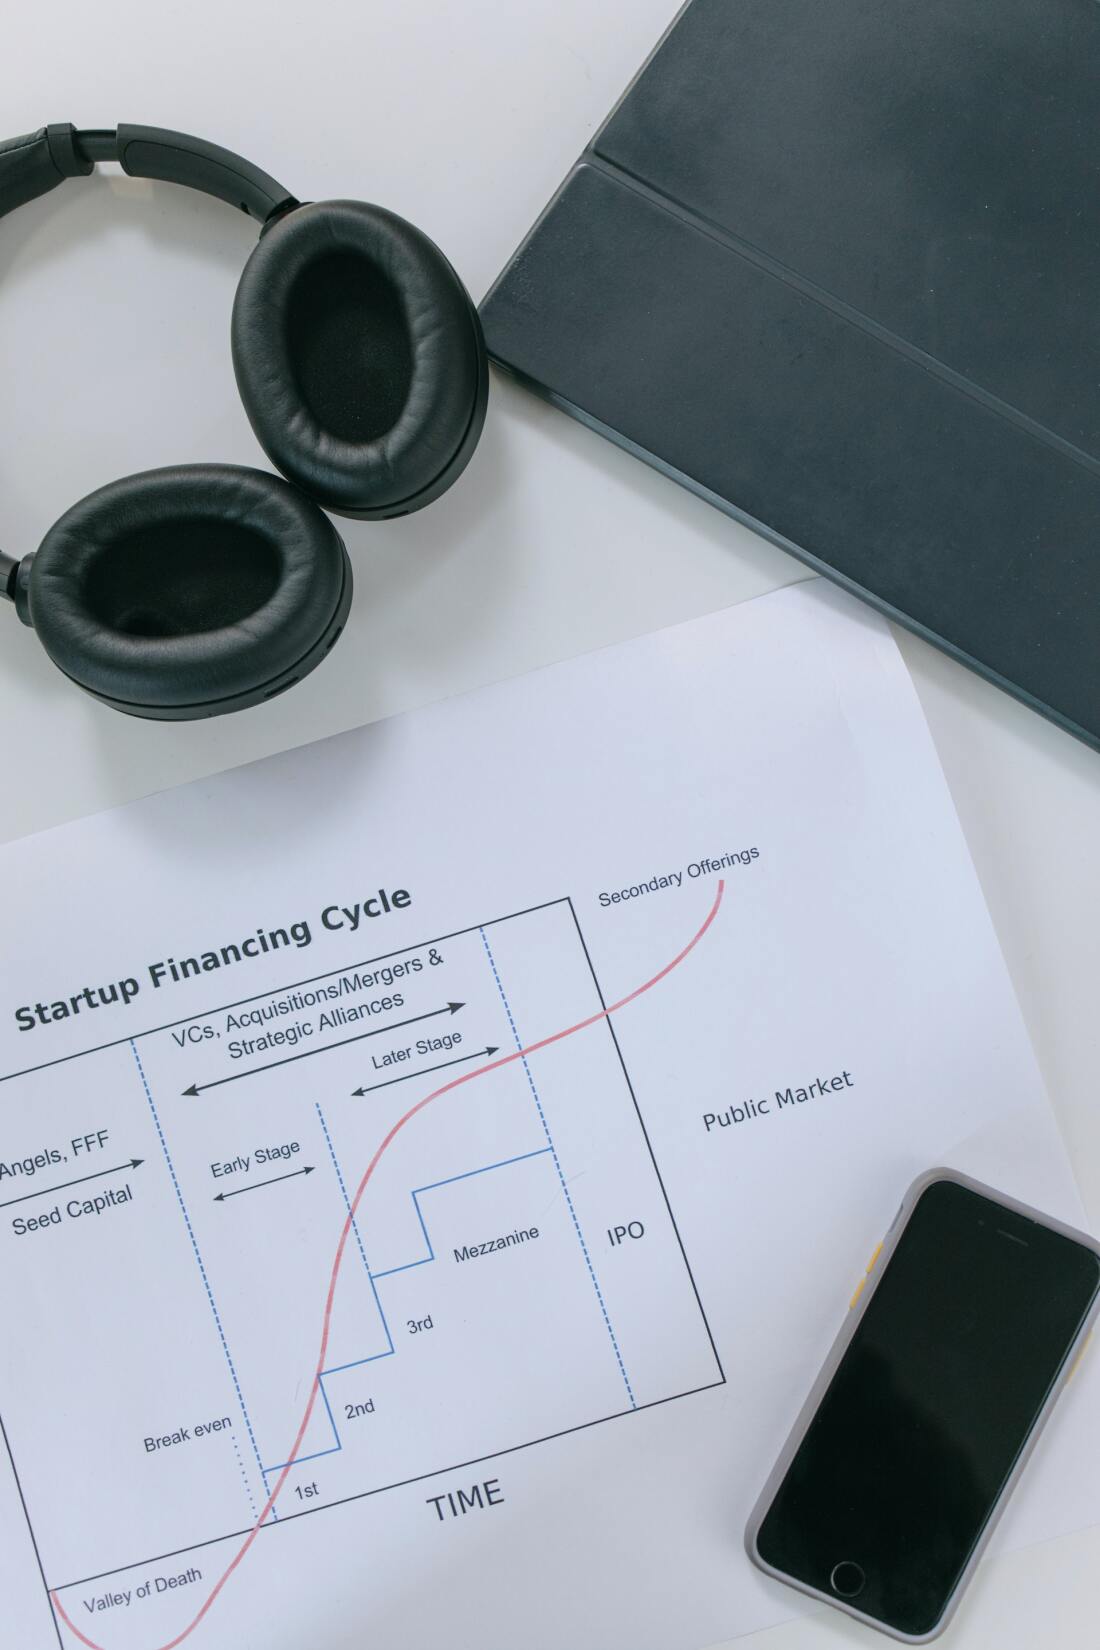 A spreadsheet of the Startup Financing Cycle